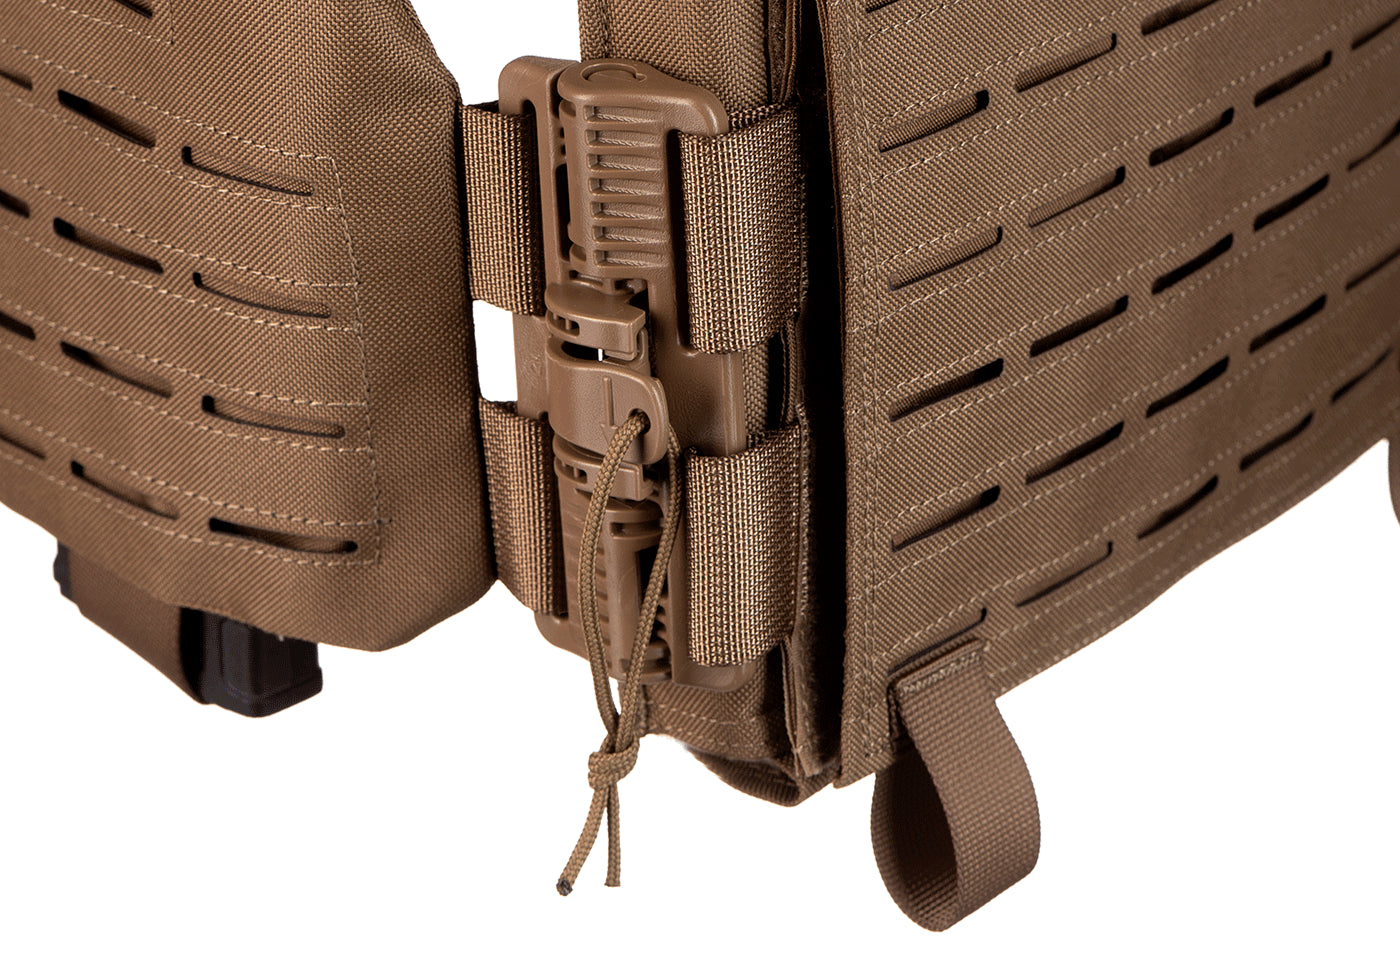 Reaper QRB Plate Carrier - Coyote - Invader Gear